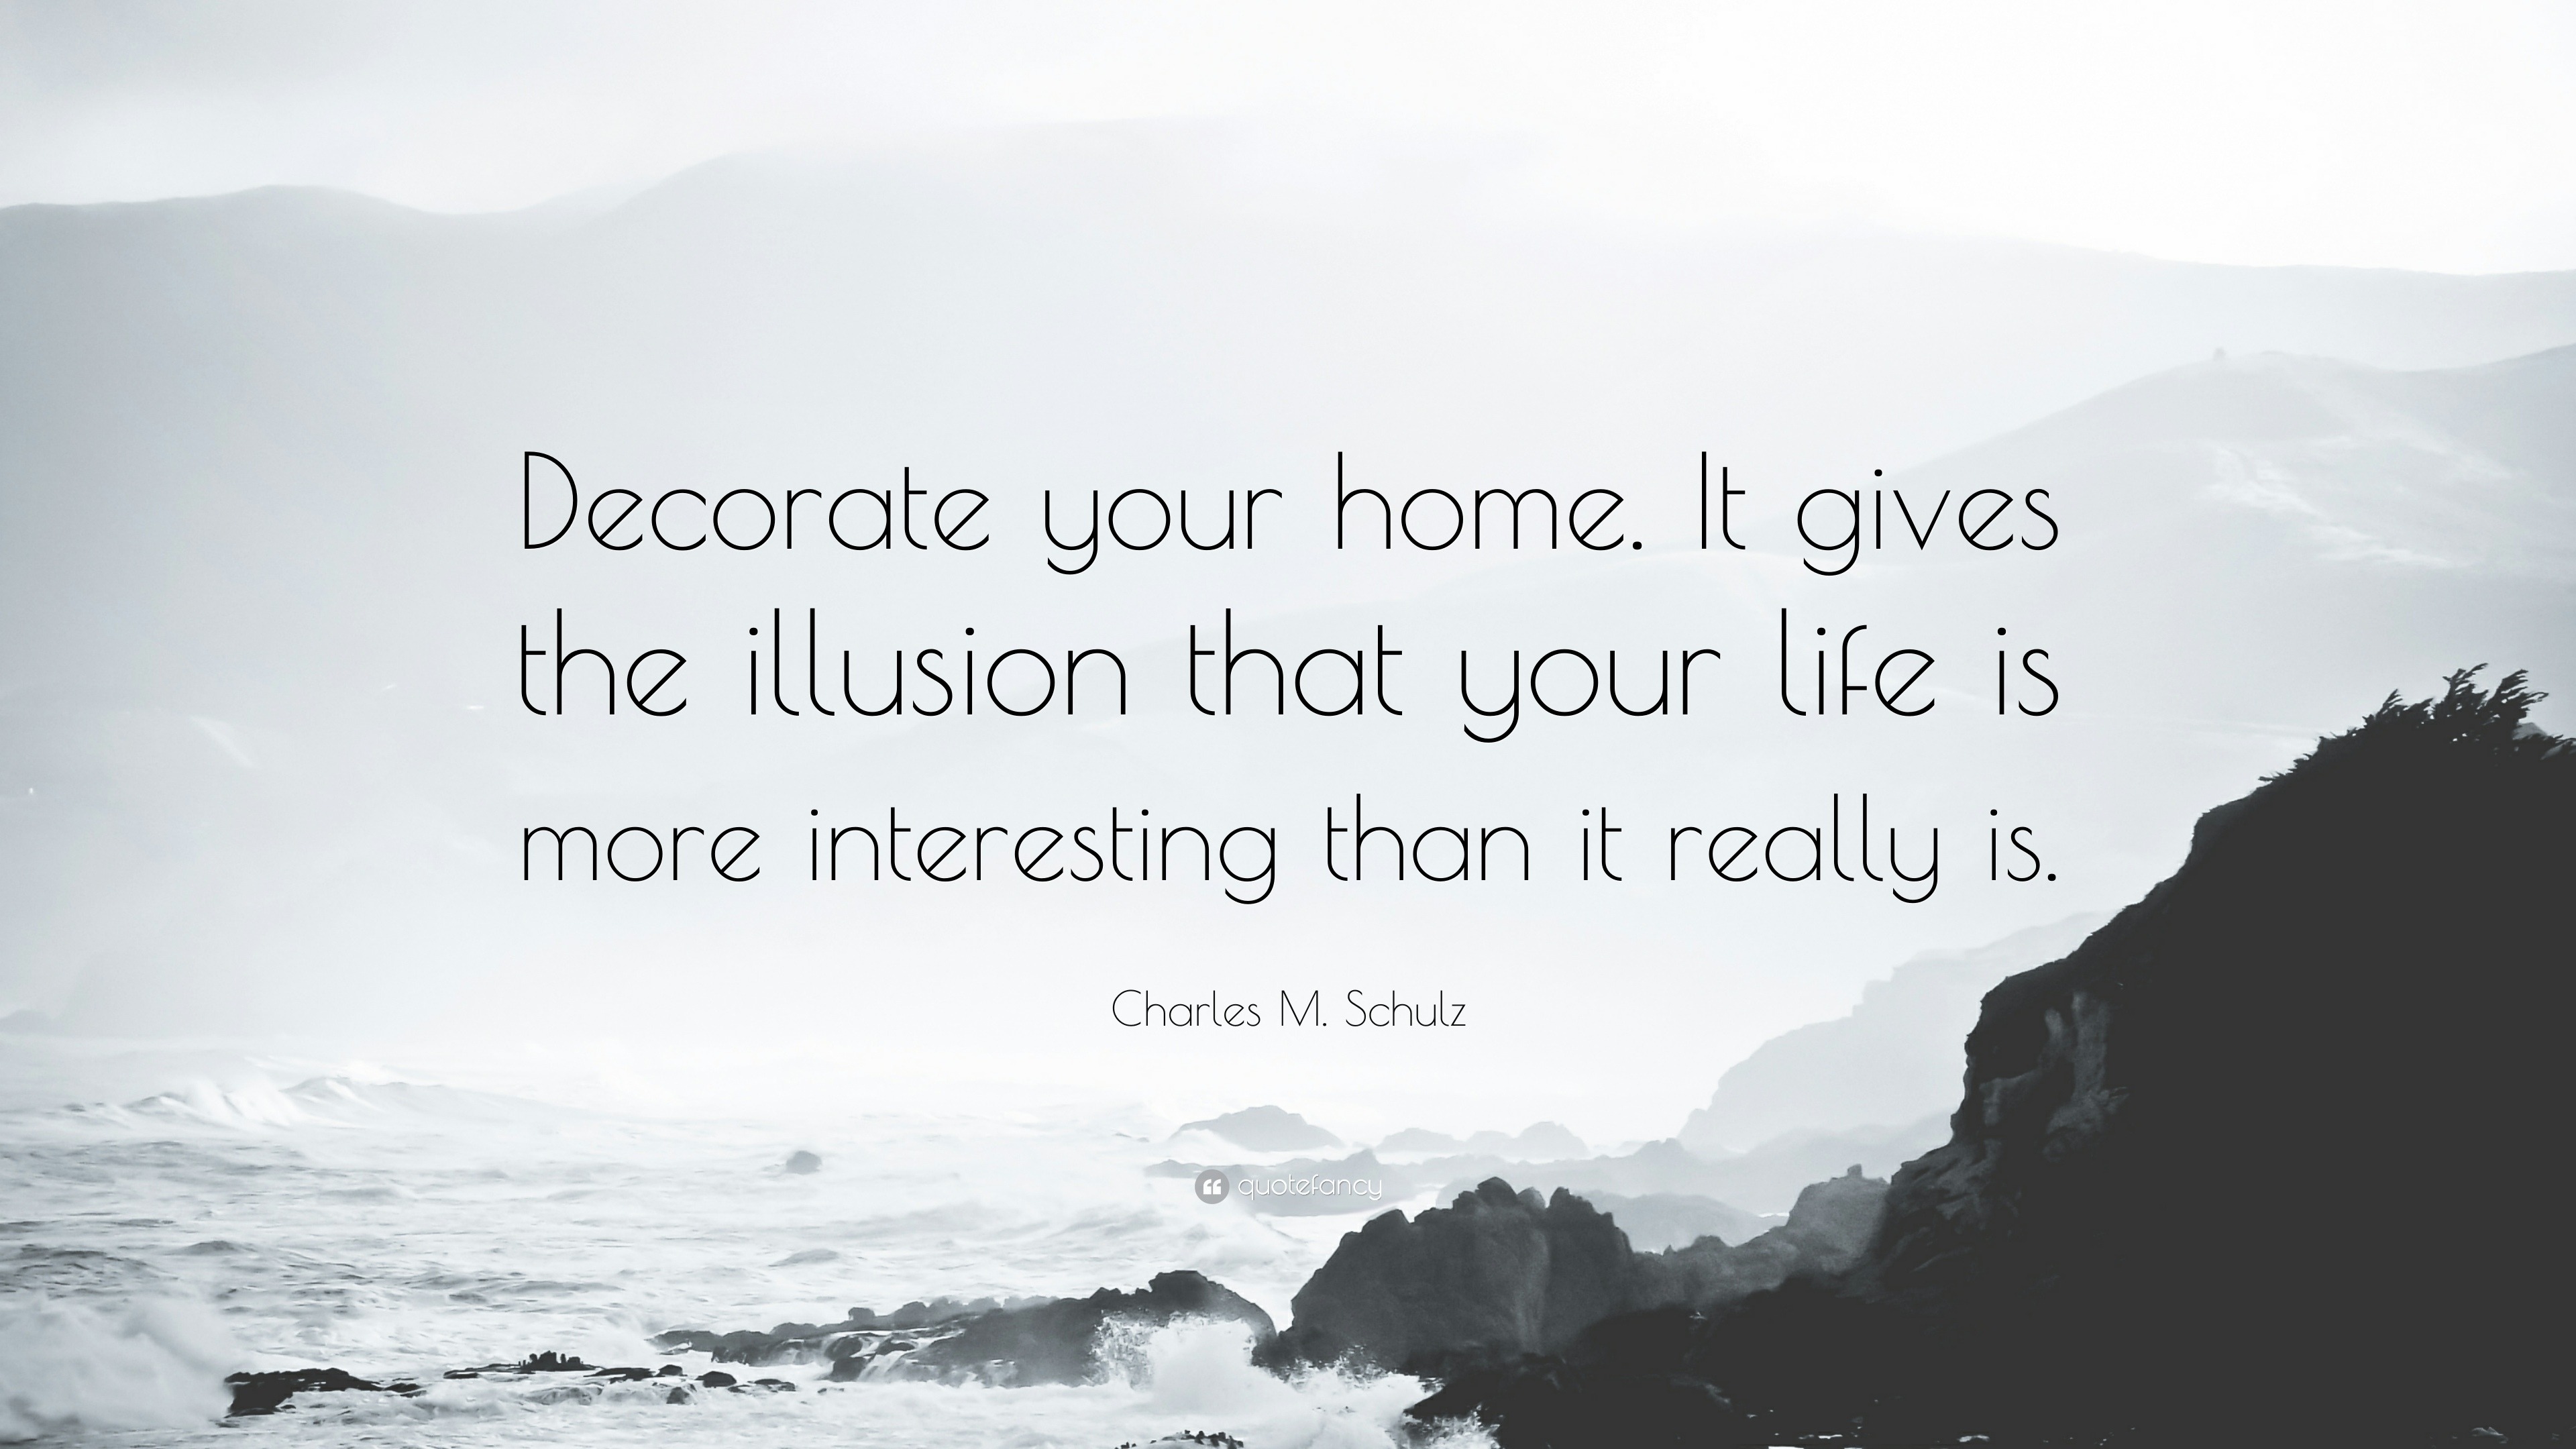 Charles M. Schulz Quote: “Decorate your home. It gives the ...